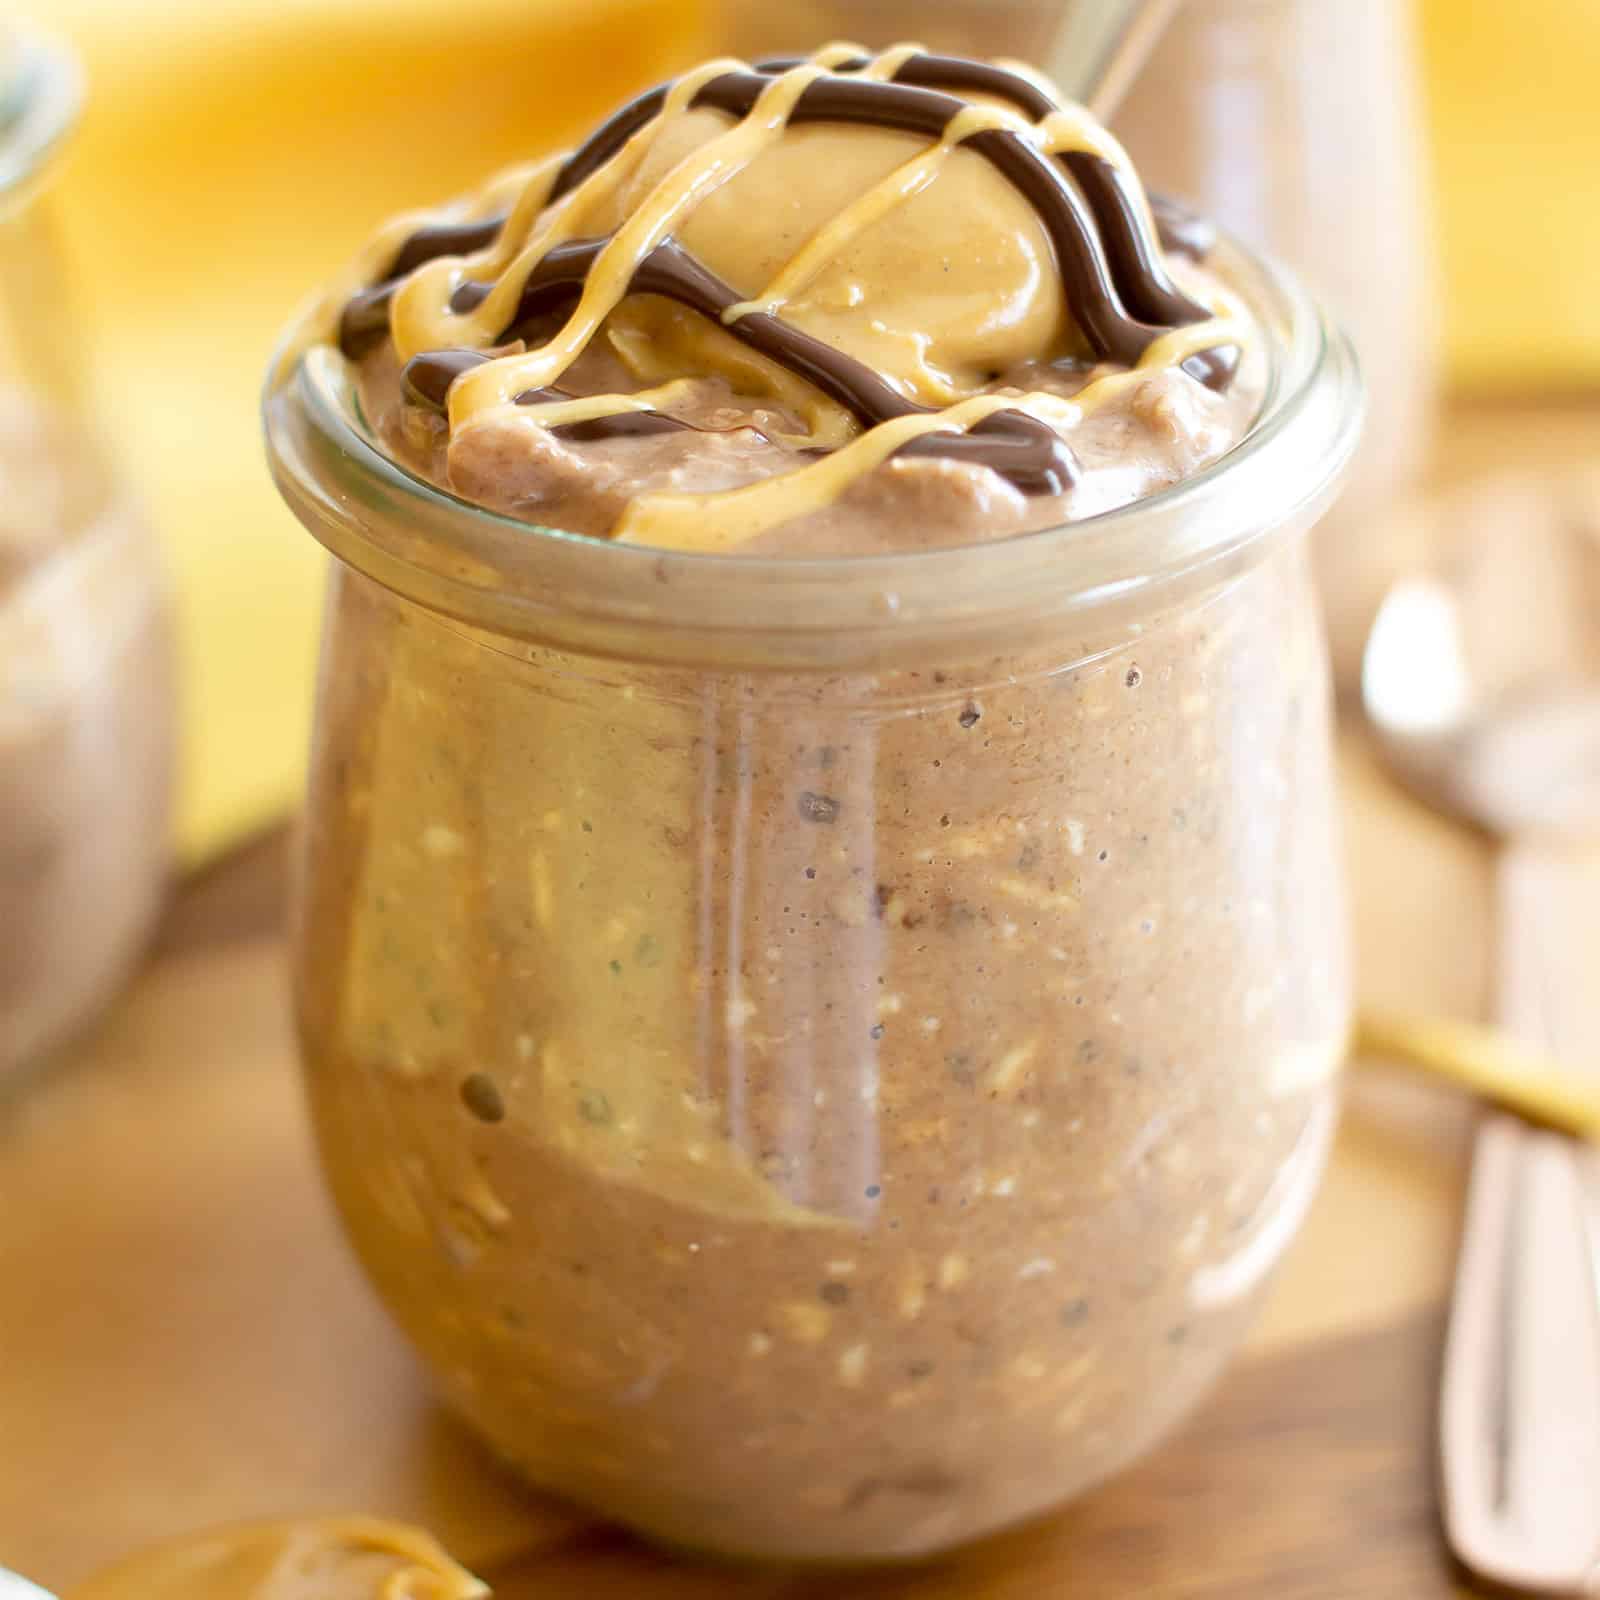 Chocolate Peanut Butter Overnight Oats: this easy vegan overnight oats recipe is gluten free & healthy! The best overnight oats (vegan)—tastes like chocolate PB cups. Made with simple, whole ingredients. Refined Sugar-Free, GF, Dairy-Free. #OvernightOats #Chocolate #PeanutButter #GlutenFree | Recipe at BeamingBaker.com